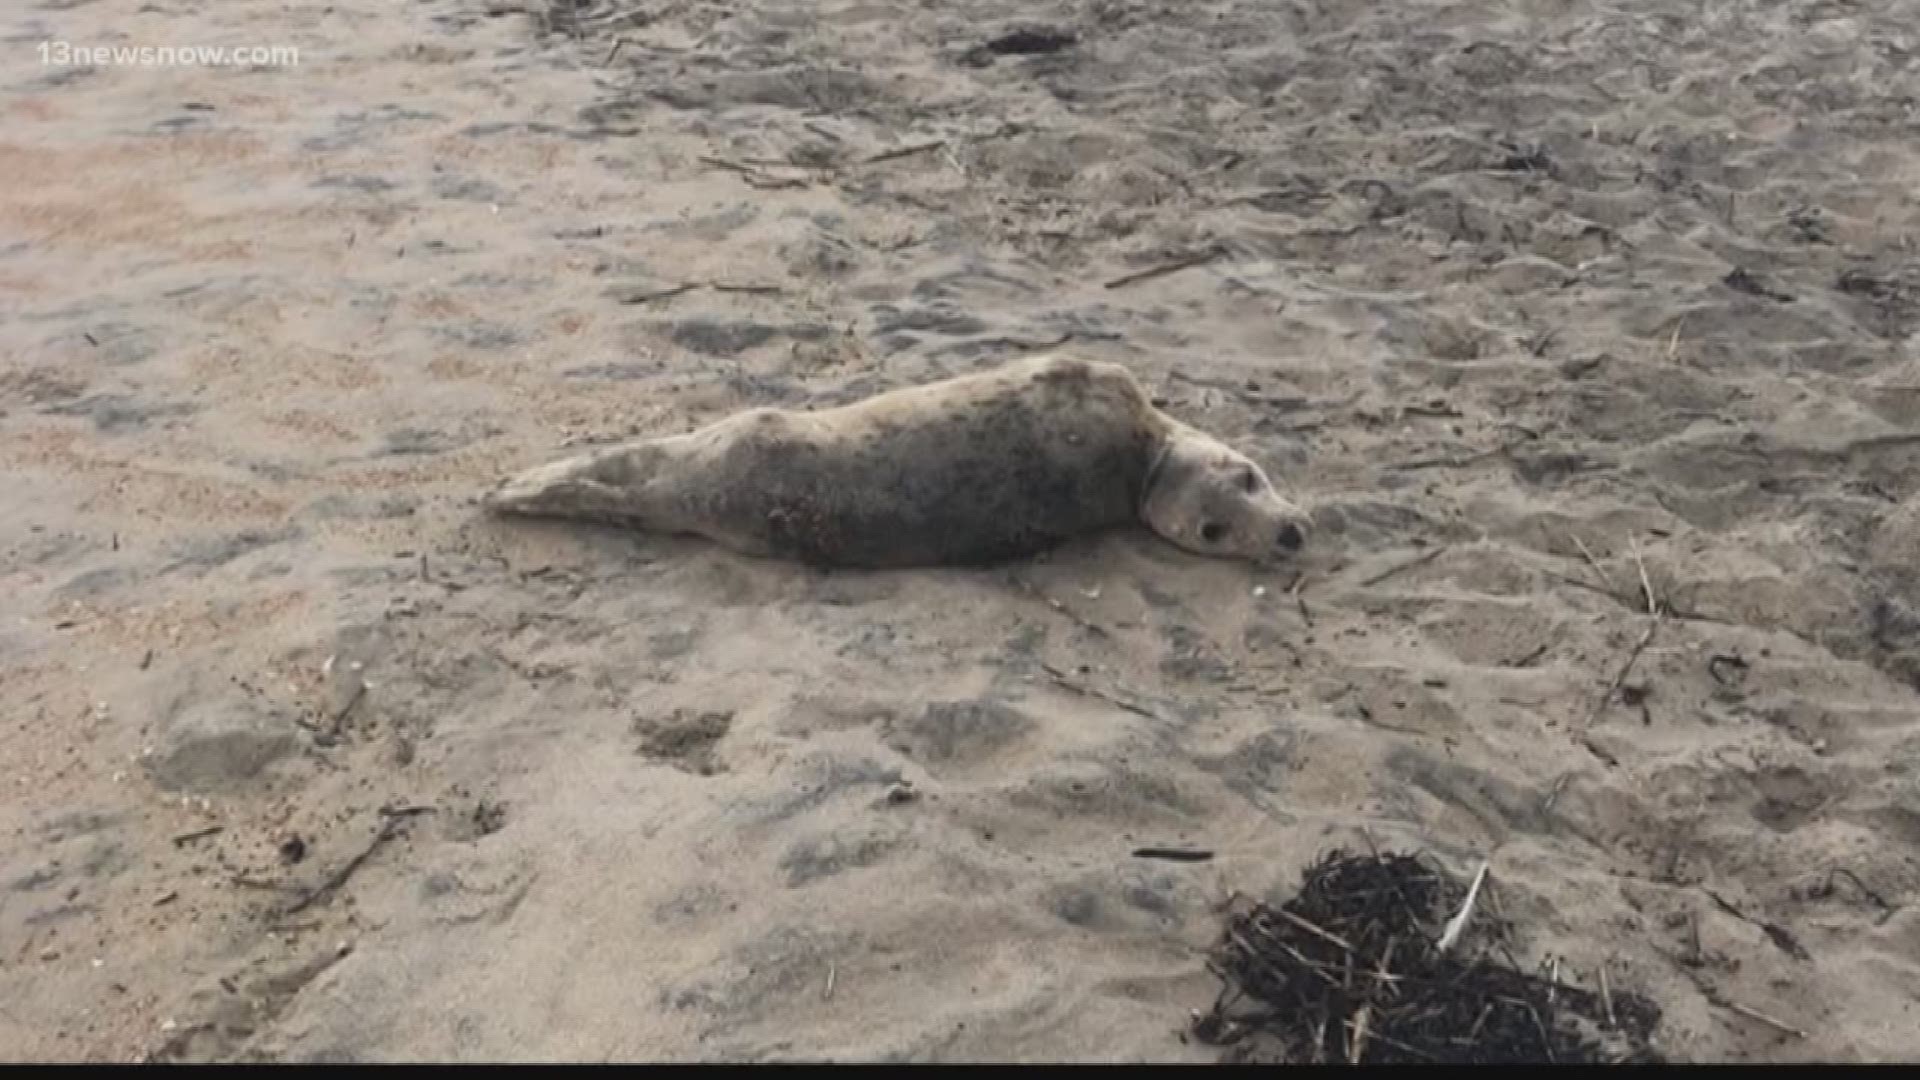 The first stranded seal in the area was rescued by the Virginia Aquarium and Marine Science Center at the Virginia Beach Oceanfront.